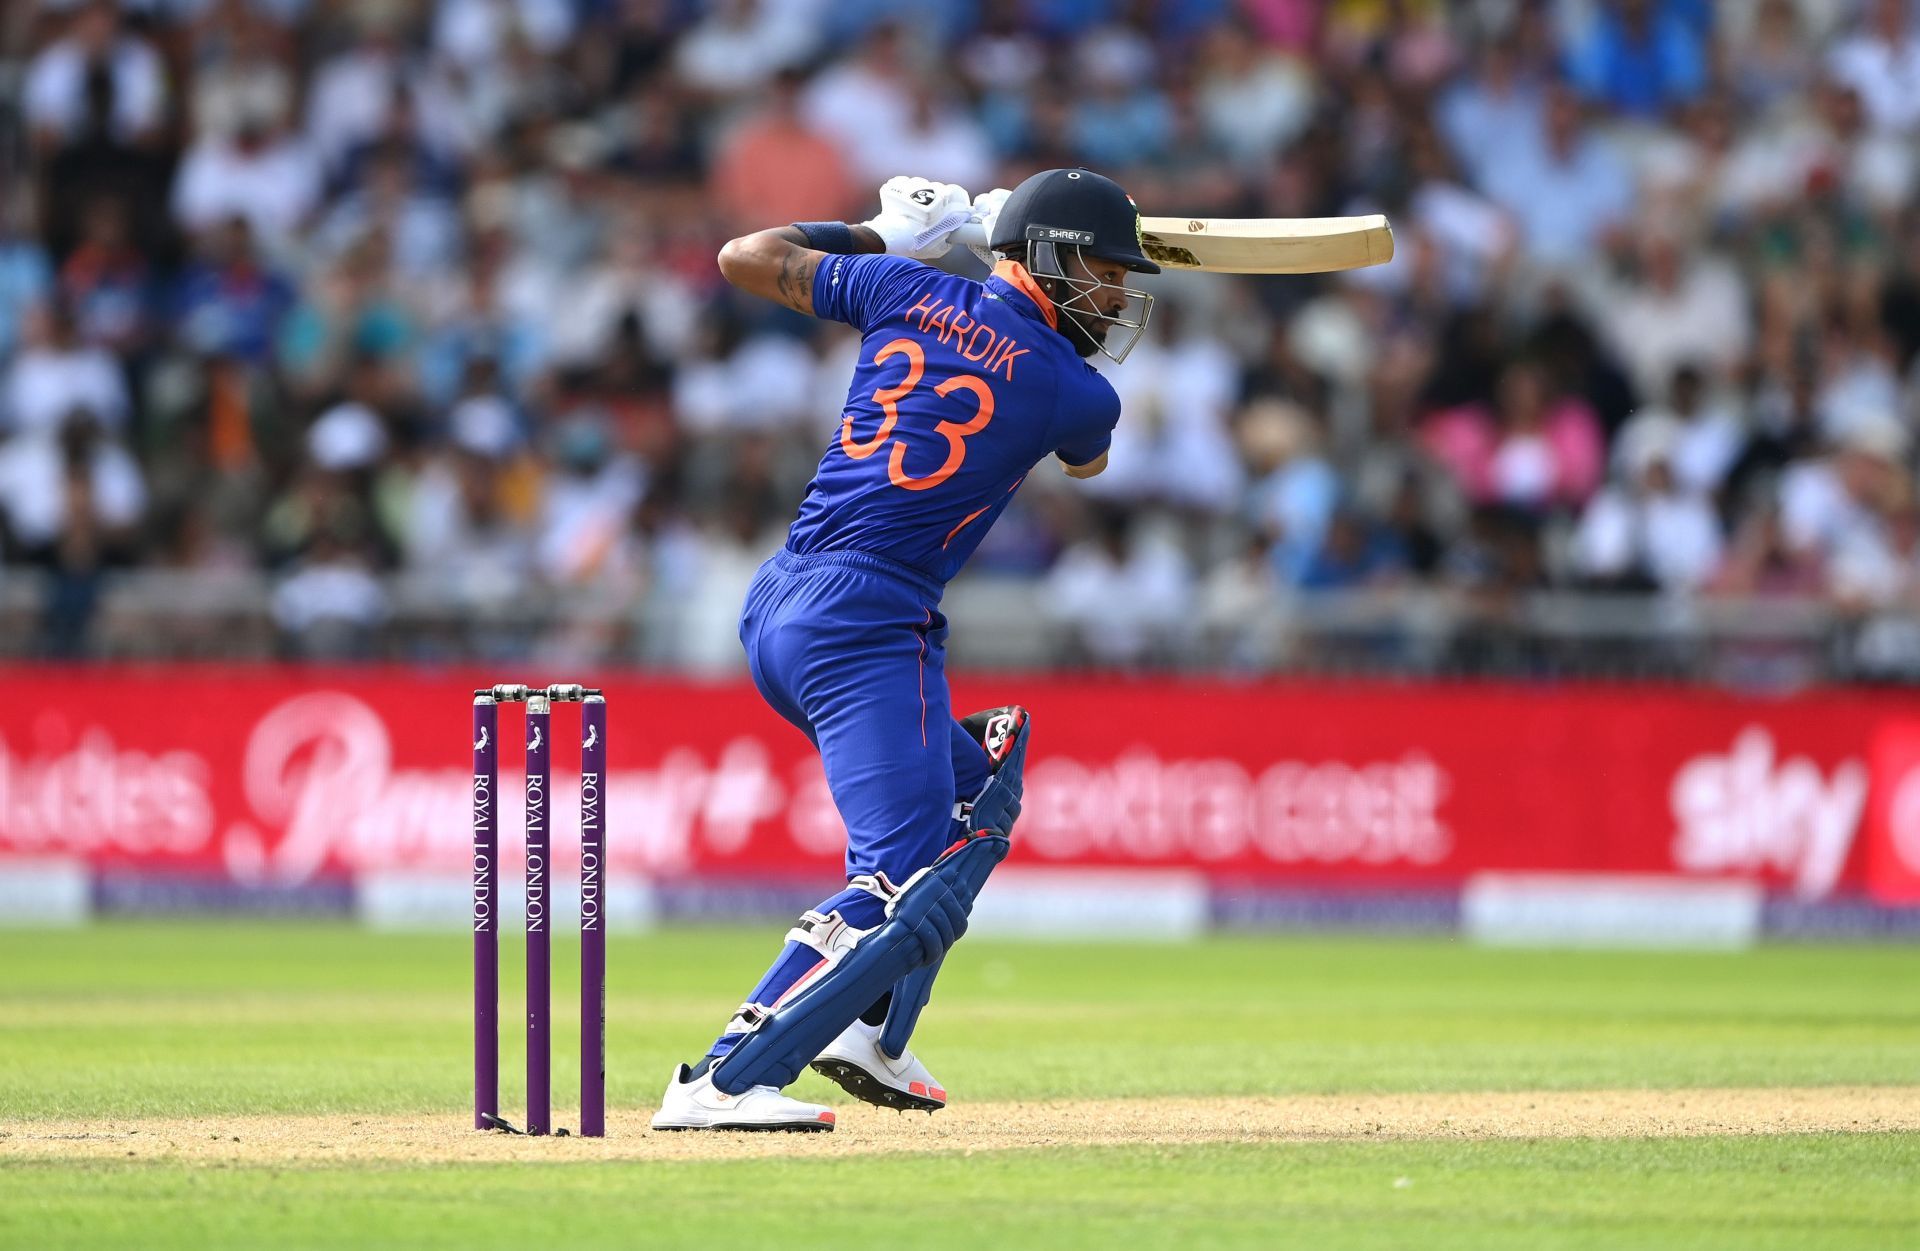 Hardik will be crucial to India finishing games in Asia Cup